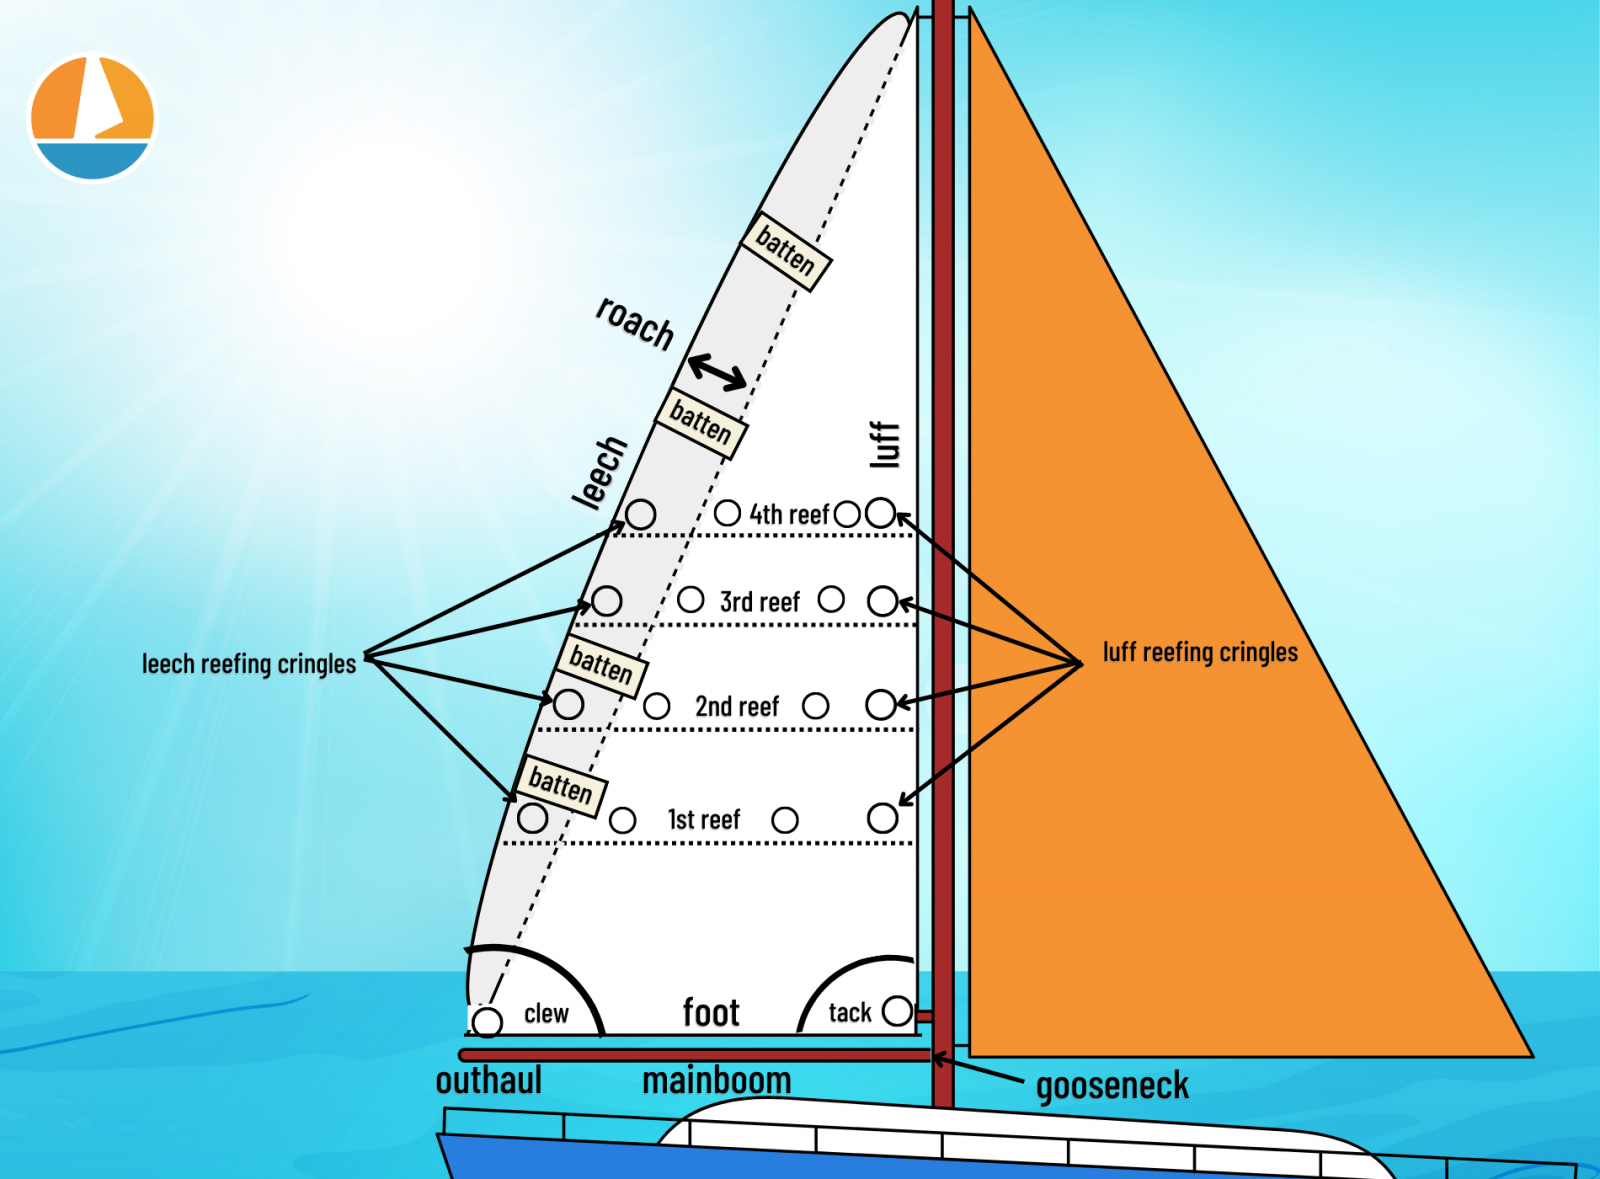 how to jibe a sailboat